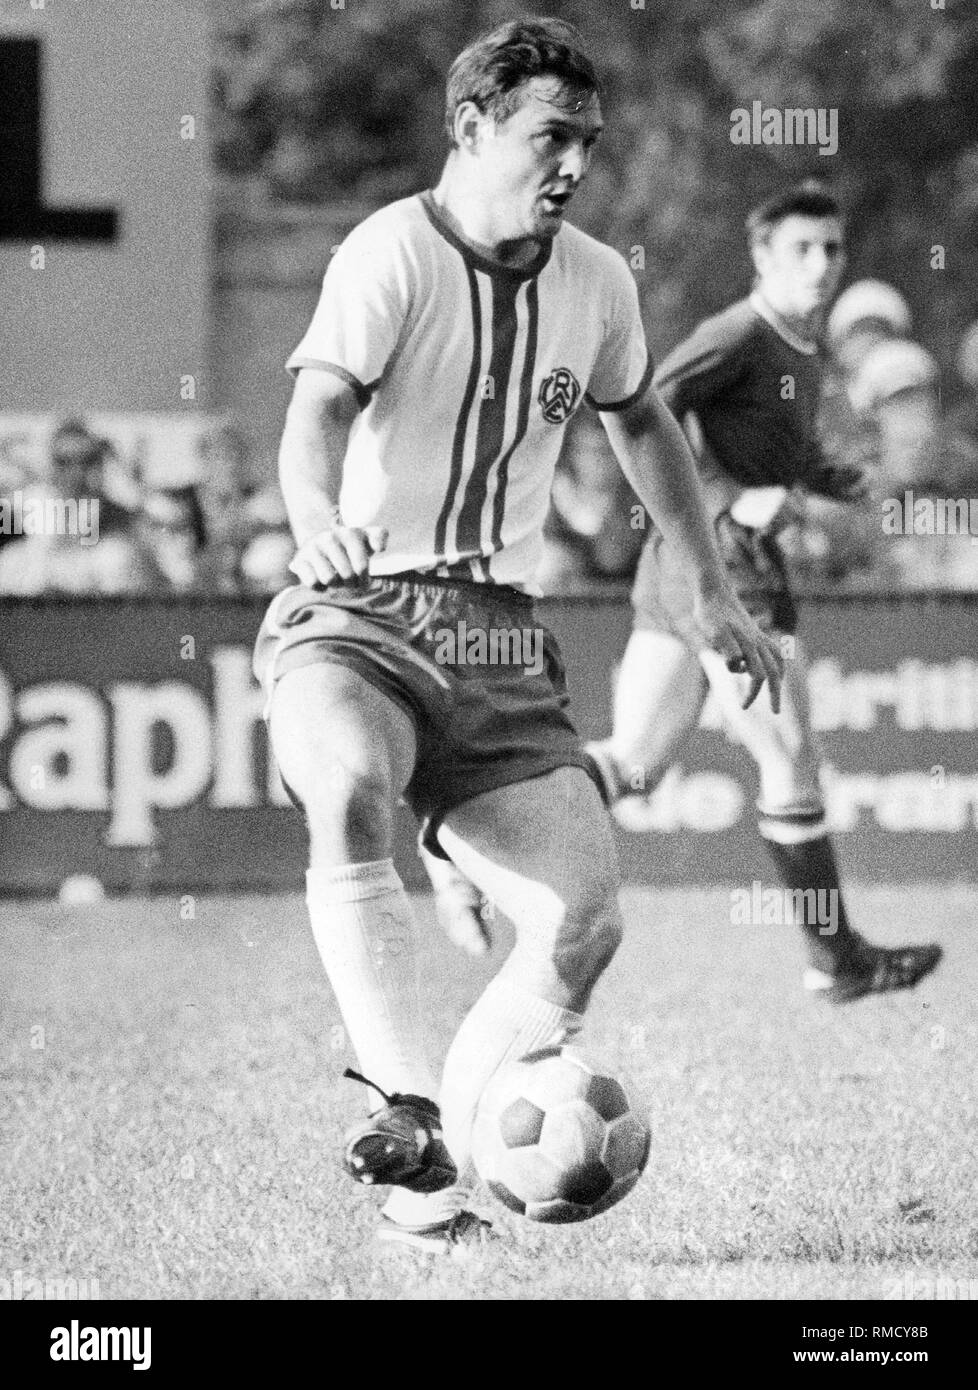 The player Willi "Ente" Lippens at a match of Rot-Weiss Essen. Stock Photo